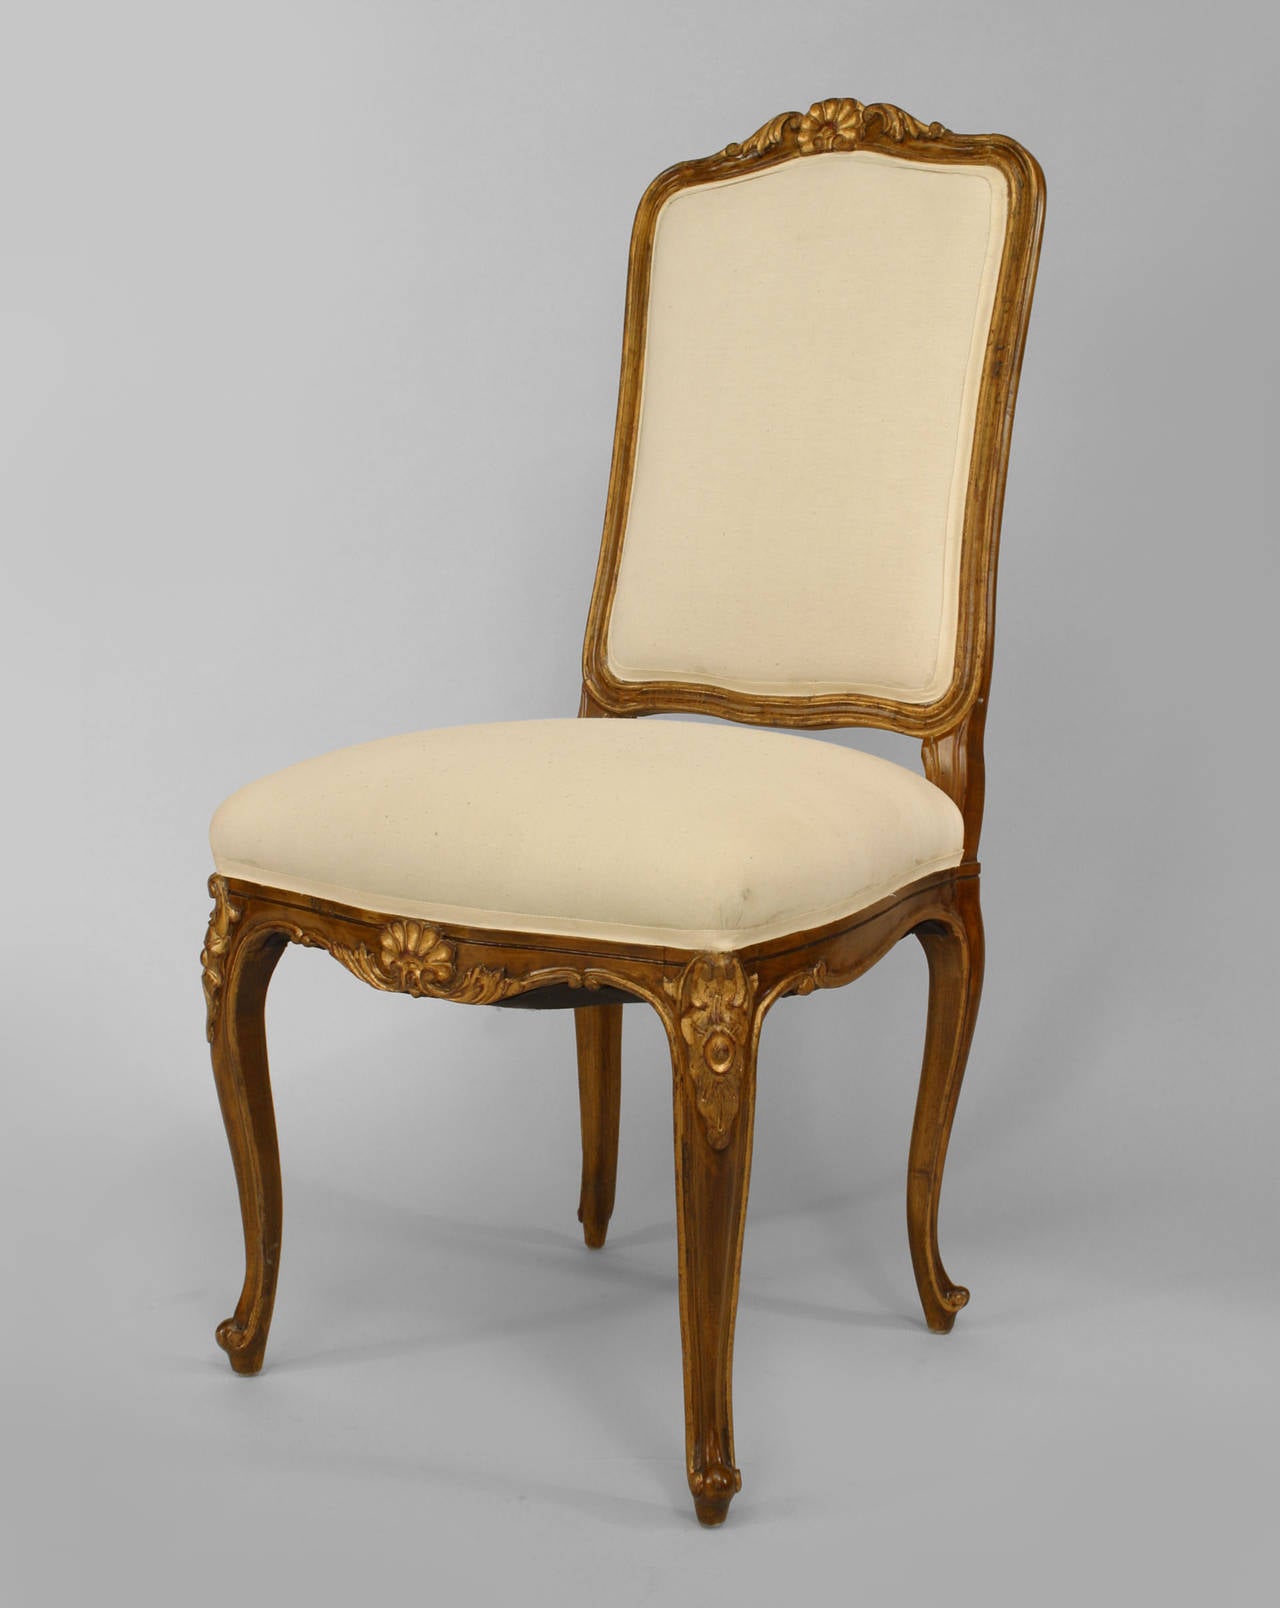 Set of 6 French Louis XV style (19/20th Cent) walnut and gold painted high back side chairs with shell carved back crest and white upholstered seat and back.
